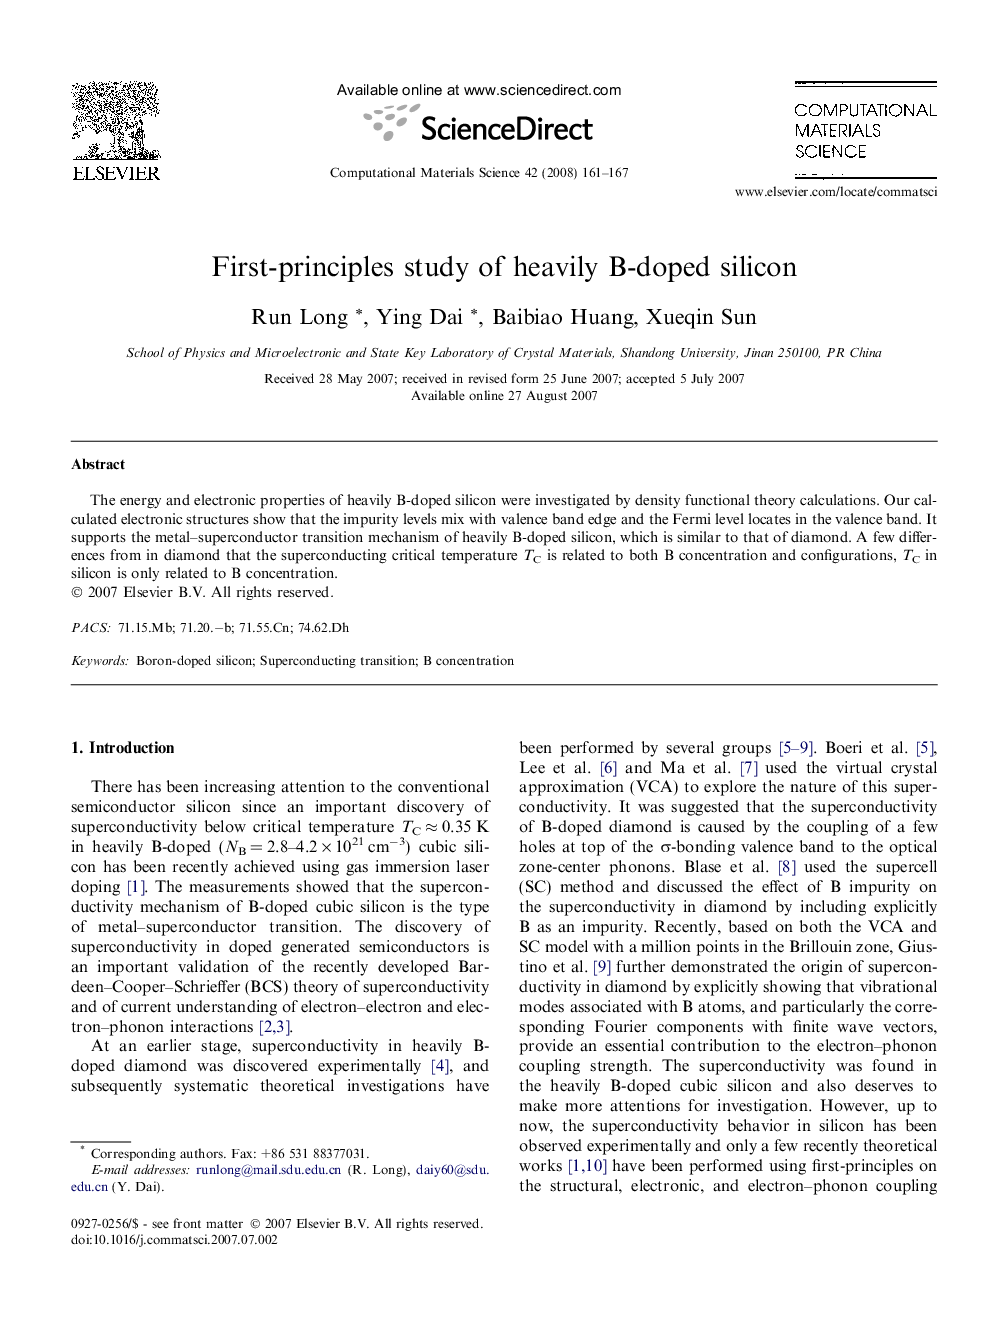 First-principles study of heavily B-doped silicon